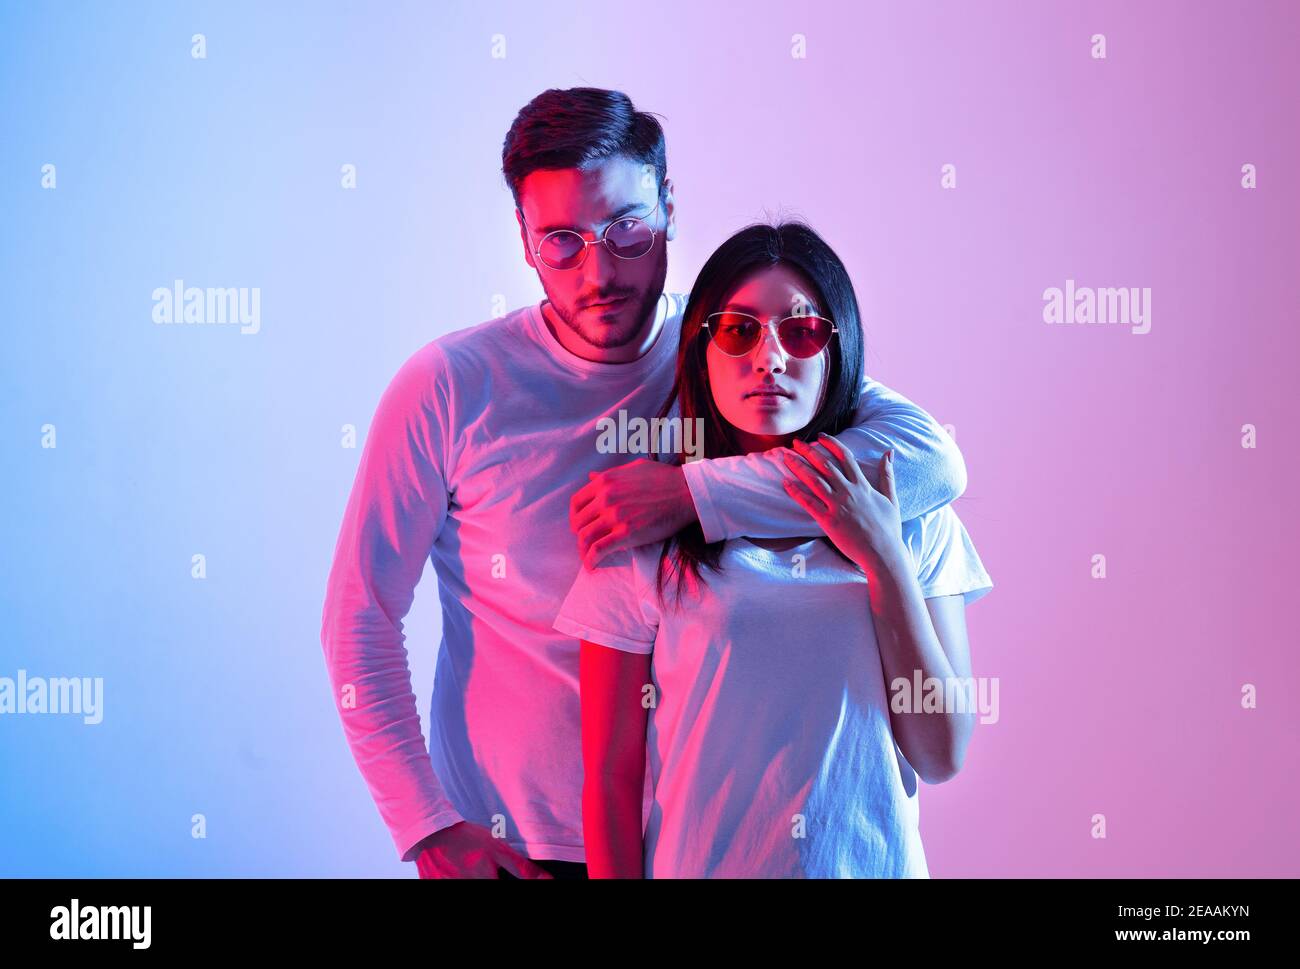 Stylish fashionable young couple for ad or offer Stock Photo